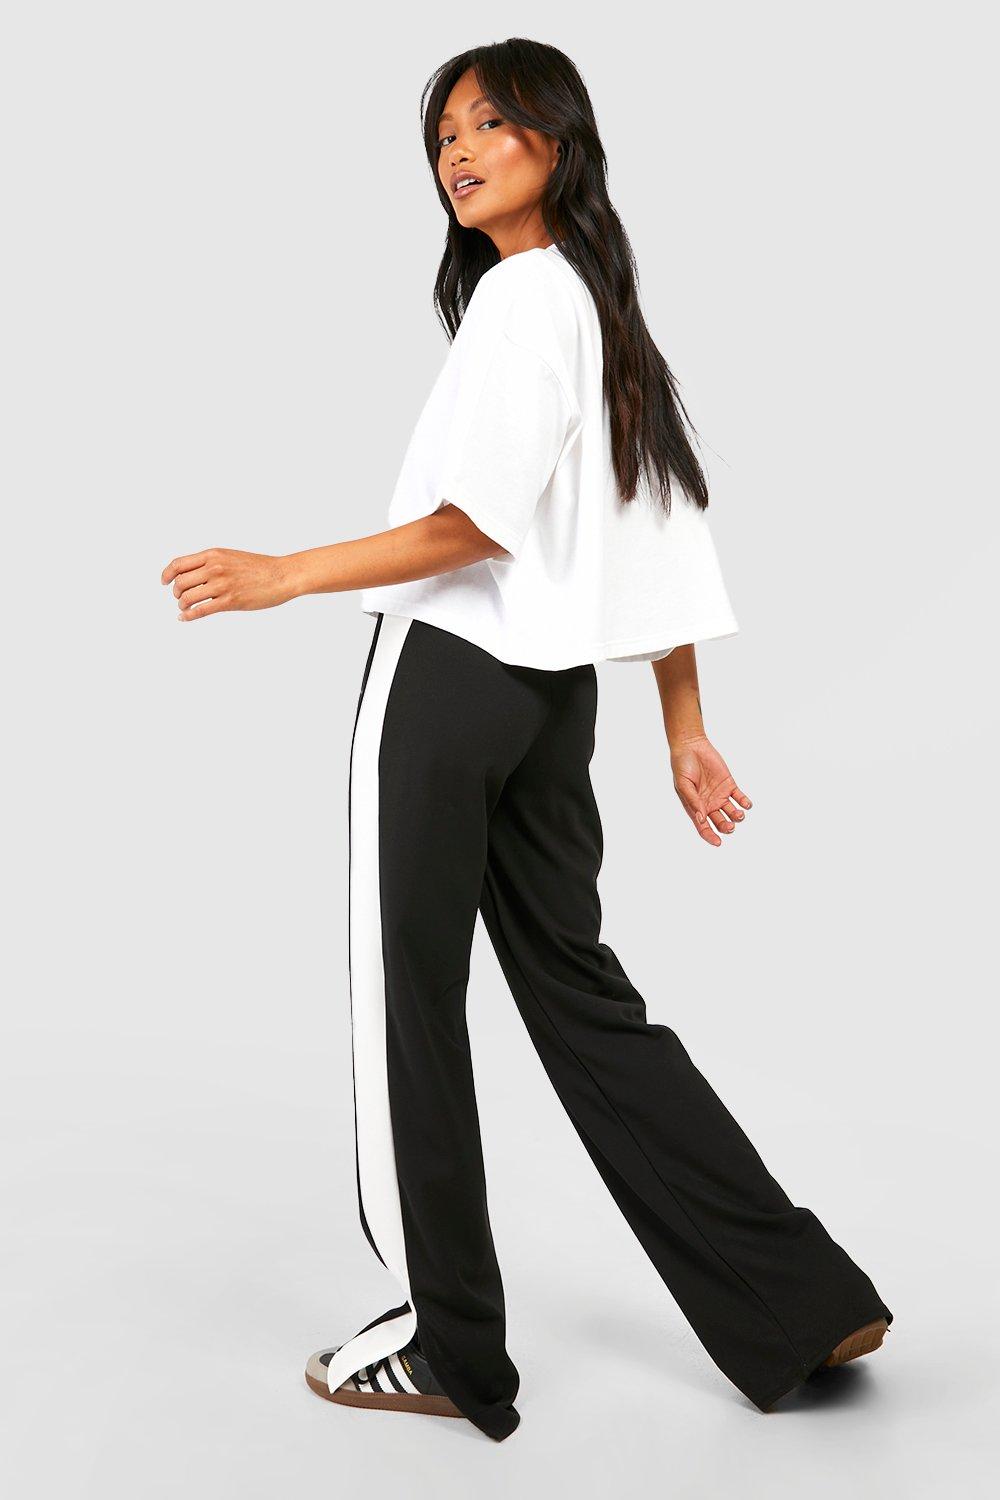 Women's Sports Pants, High-Waist Trousers, Side Striped Party